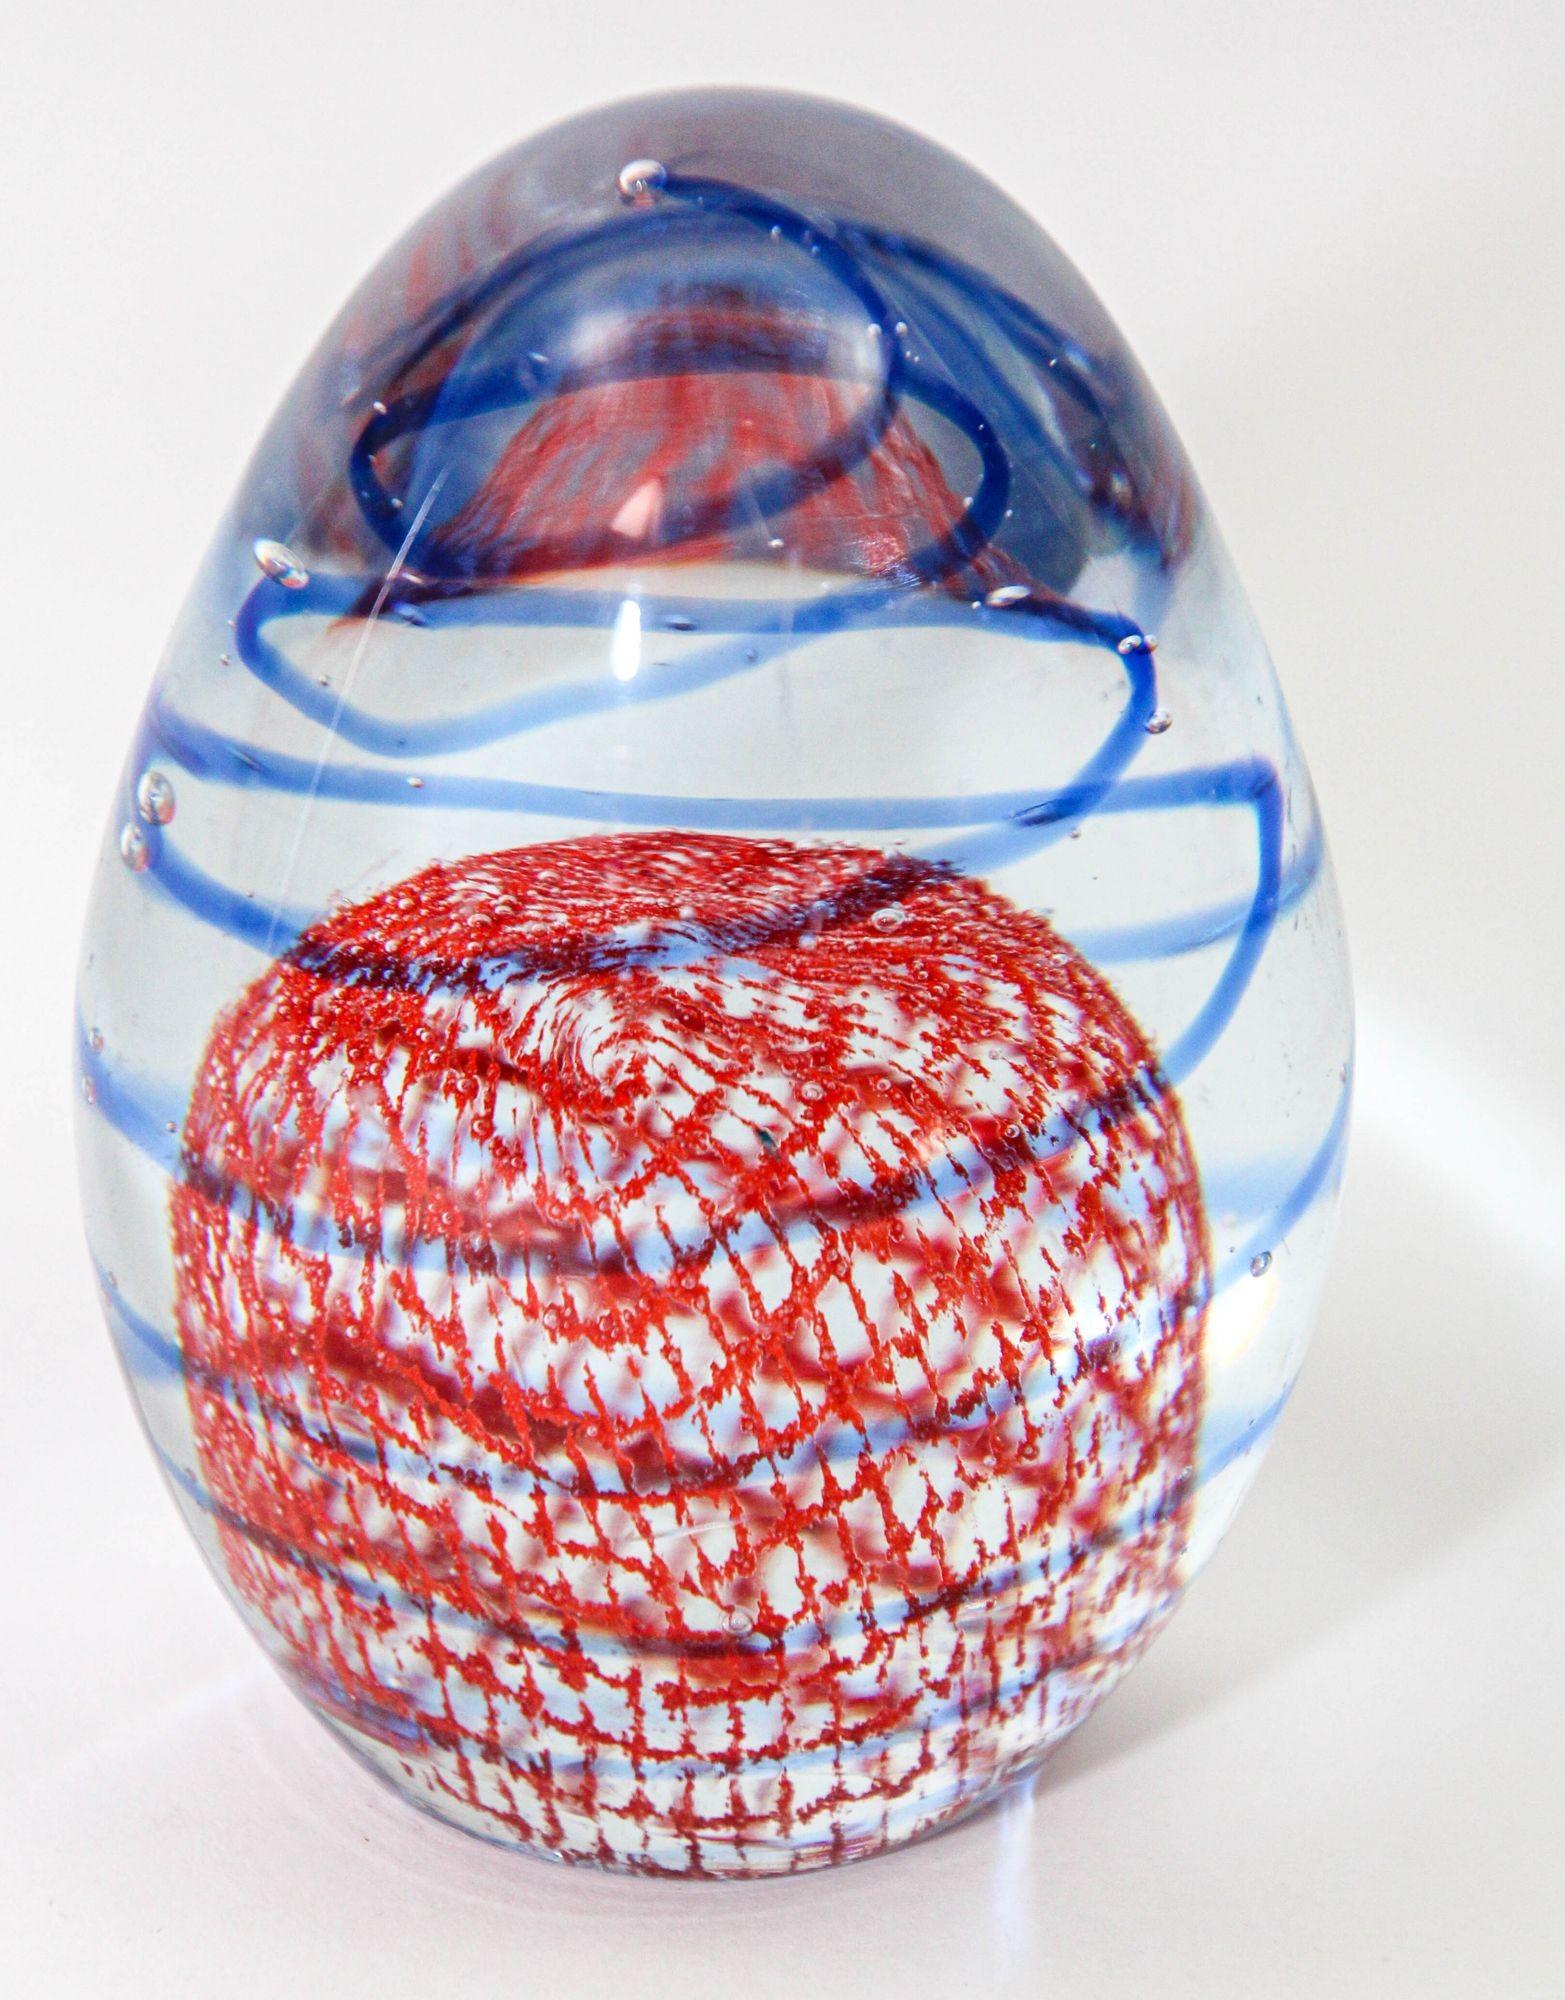 Murano Paperweight Blue Red Ribbons Controlled Bubbles Italian Art Glass Egg Shape.
Orange and Blue Art Glass Sphere Paperweight Decorative Object.
A very beautiful orange and blue ribbon art glass paperweight decorative blown crystal glass